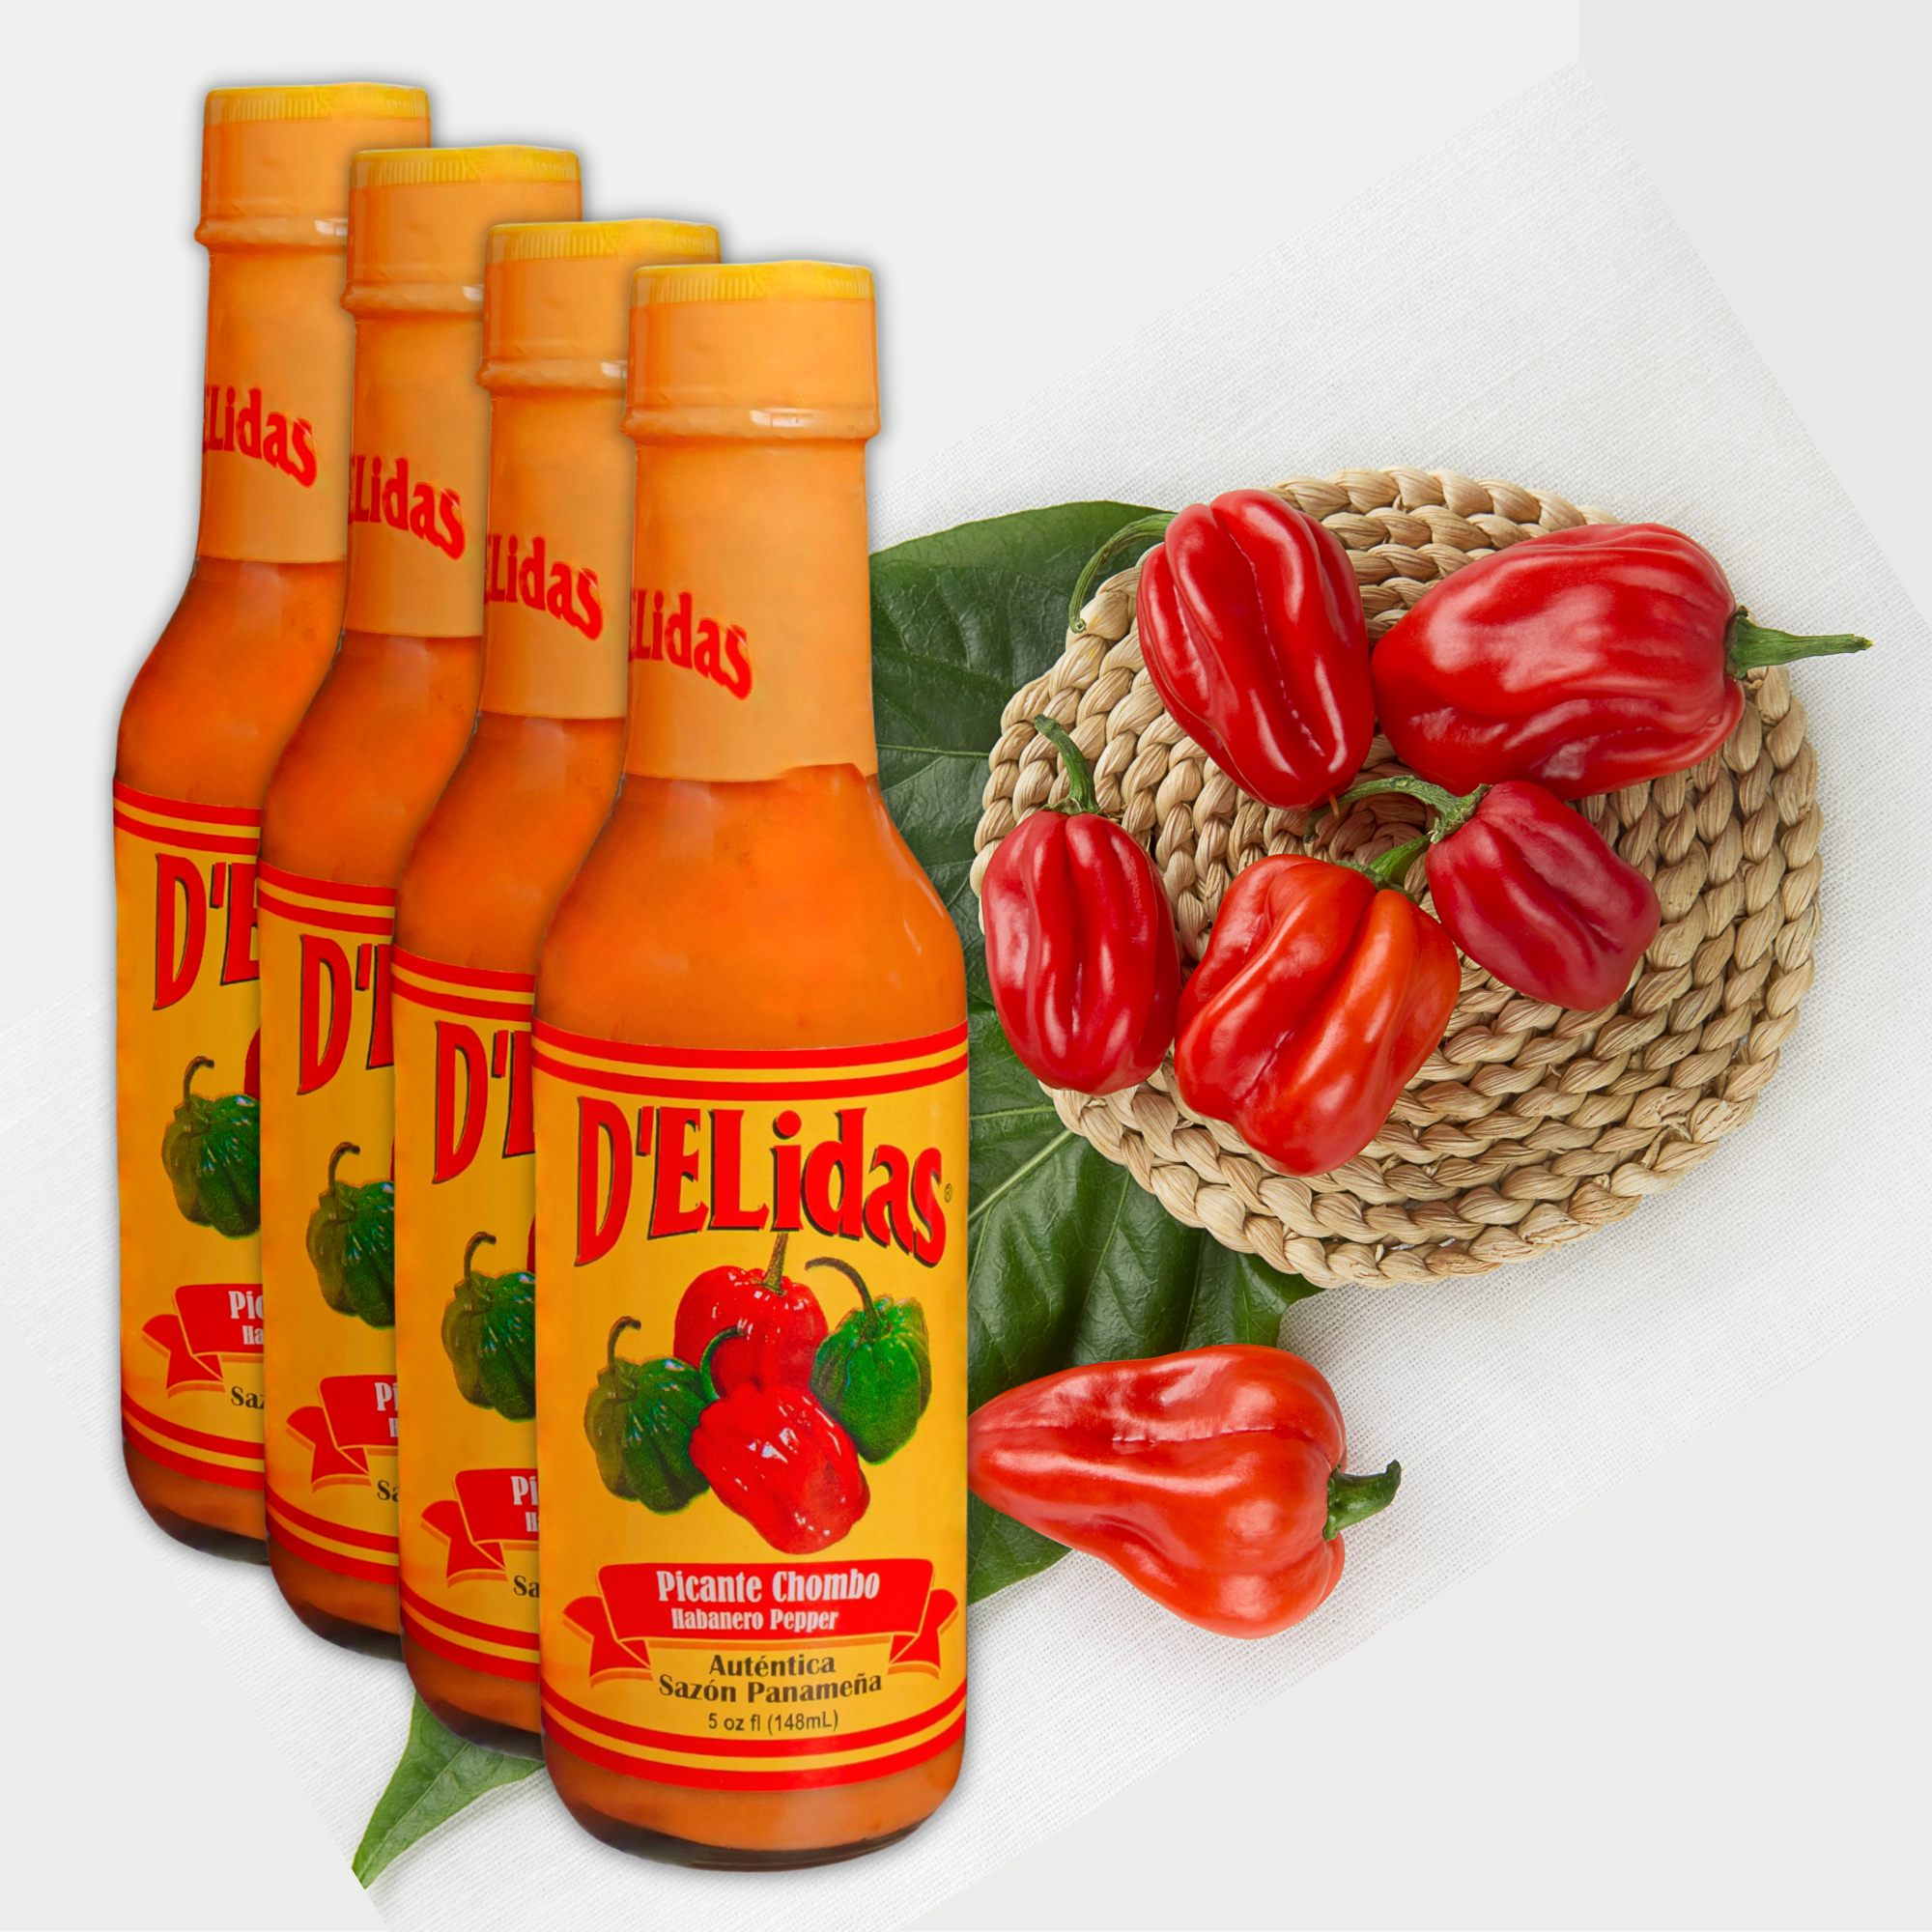 D'ELidas Habanero Hot Sauce, All Natural Chombo Picante Sauce #1 in Panama (5oz, 4-pack) - image 1 of 7